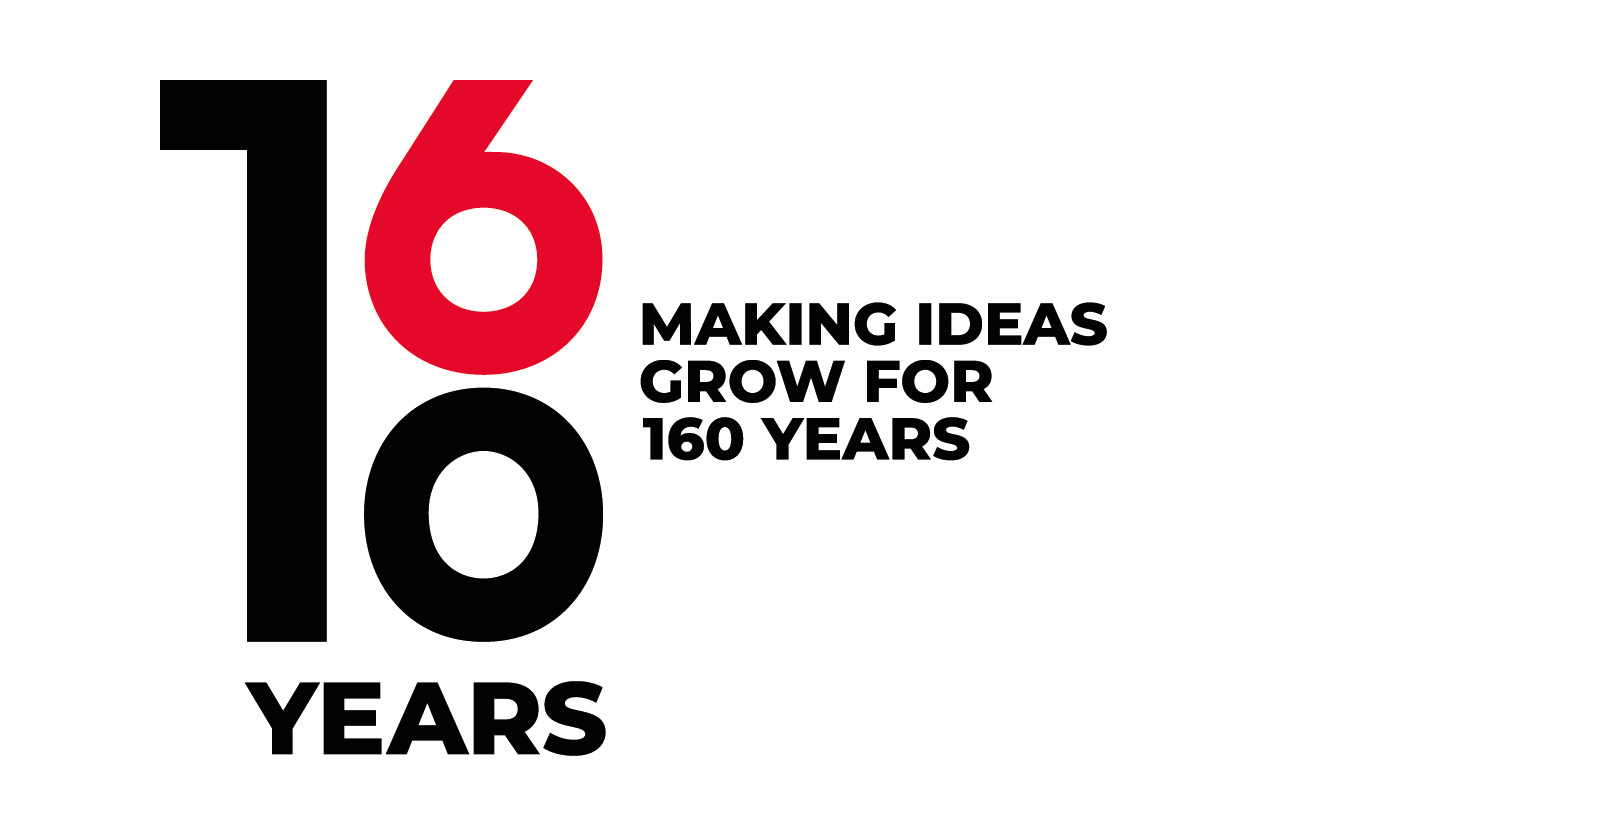 160 years - Making ideas grow for 160 years